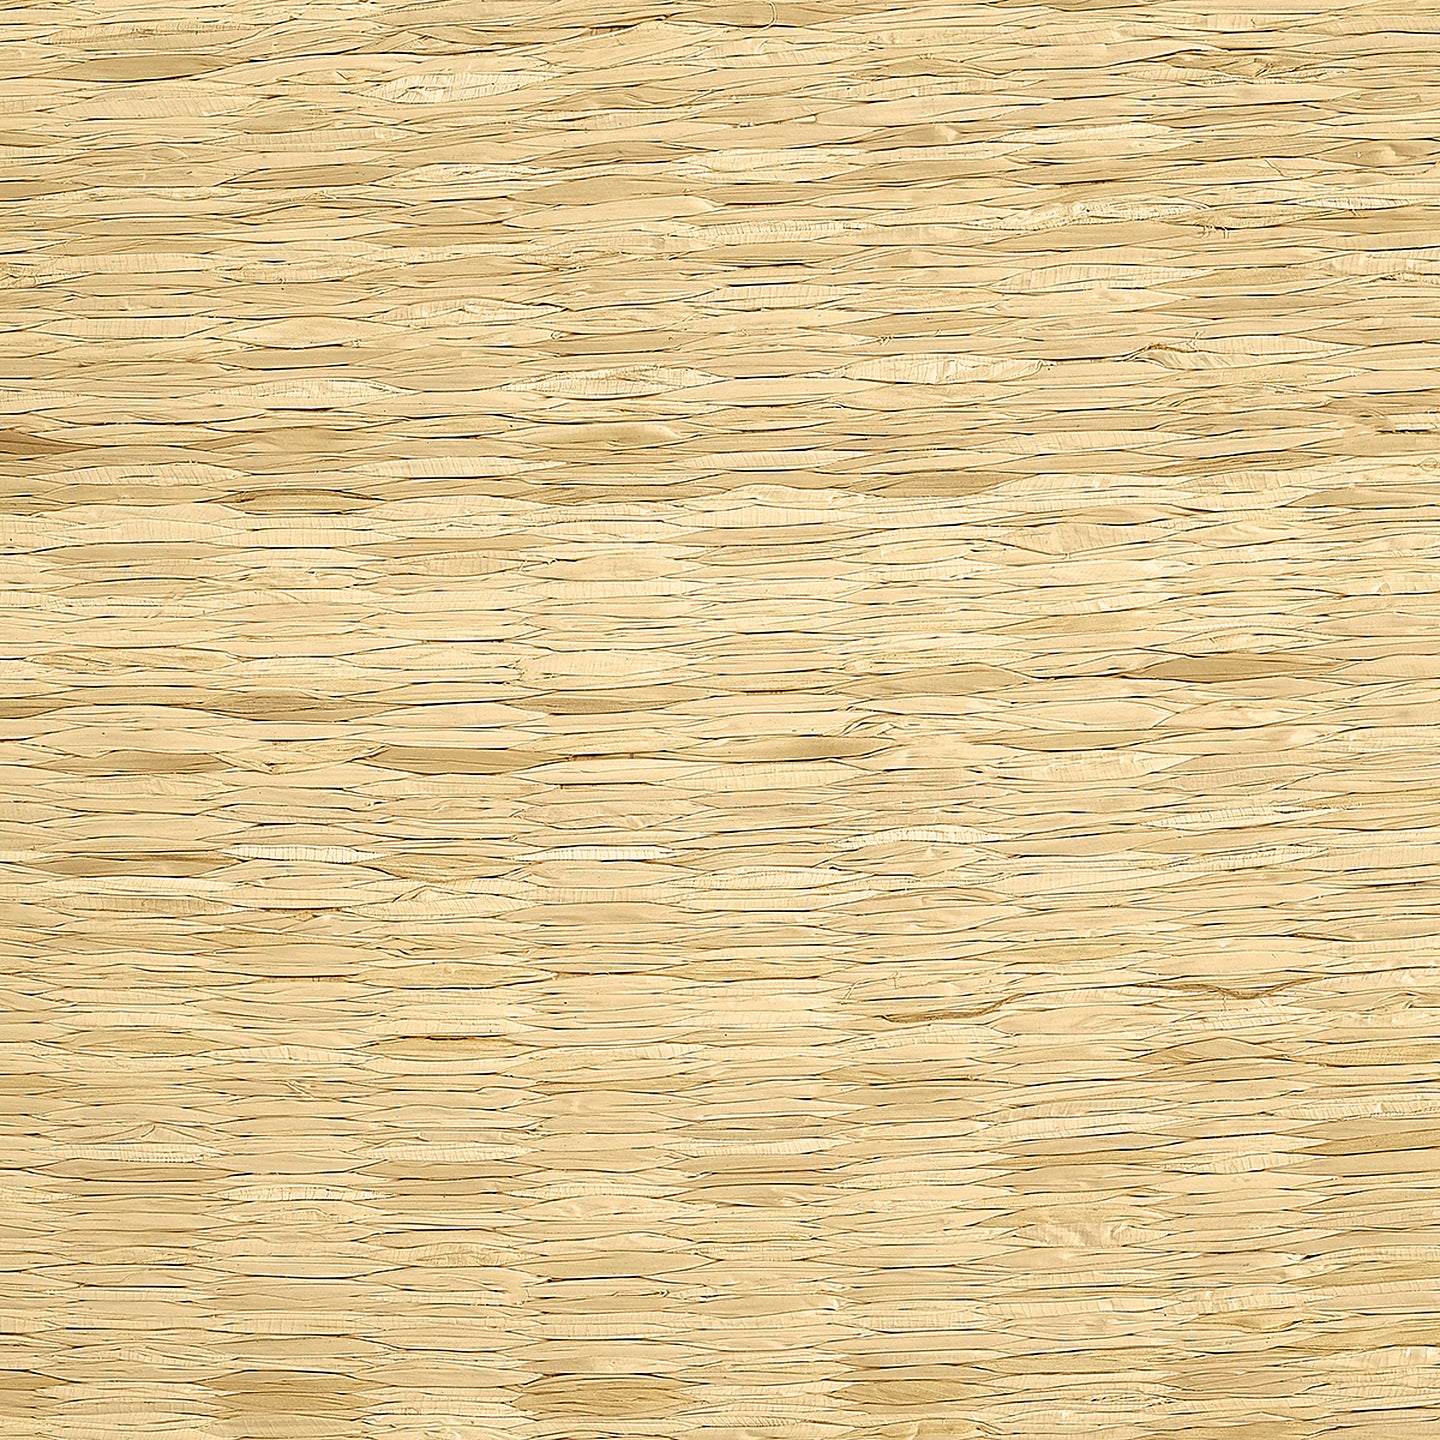 Purchase Phillip Jeffries Wallpaper - 10313, Thatched Raffia - Natural Netting 